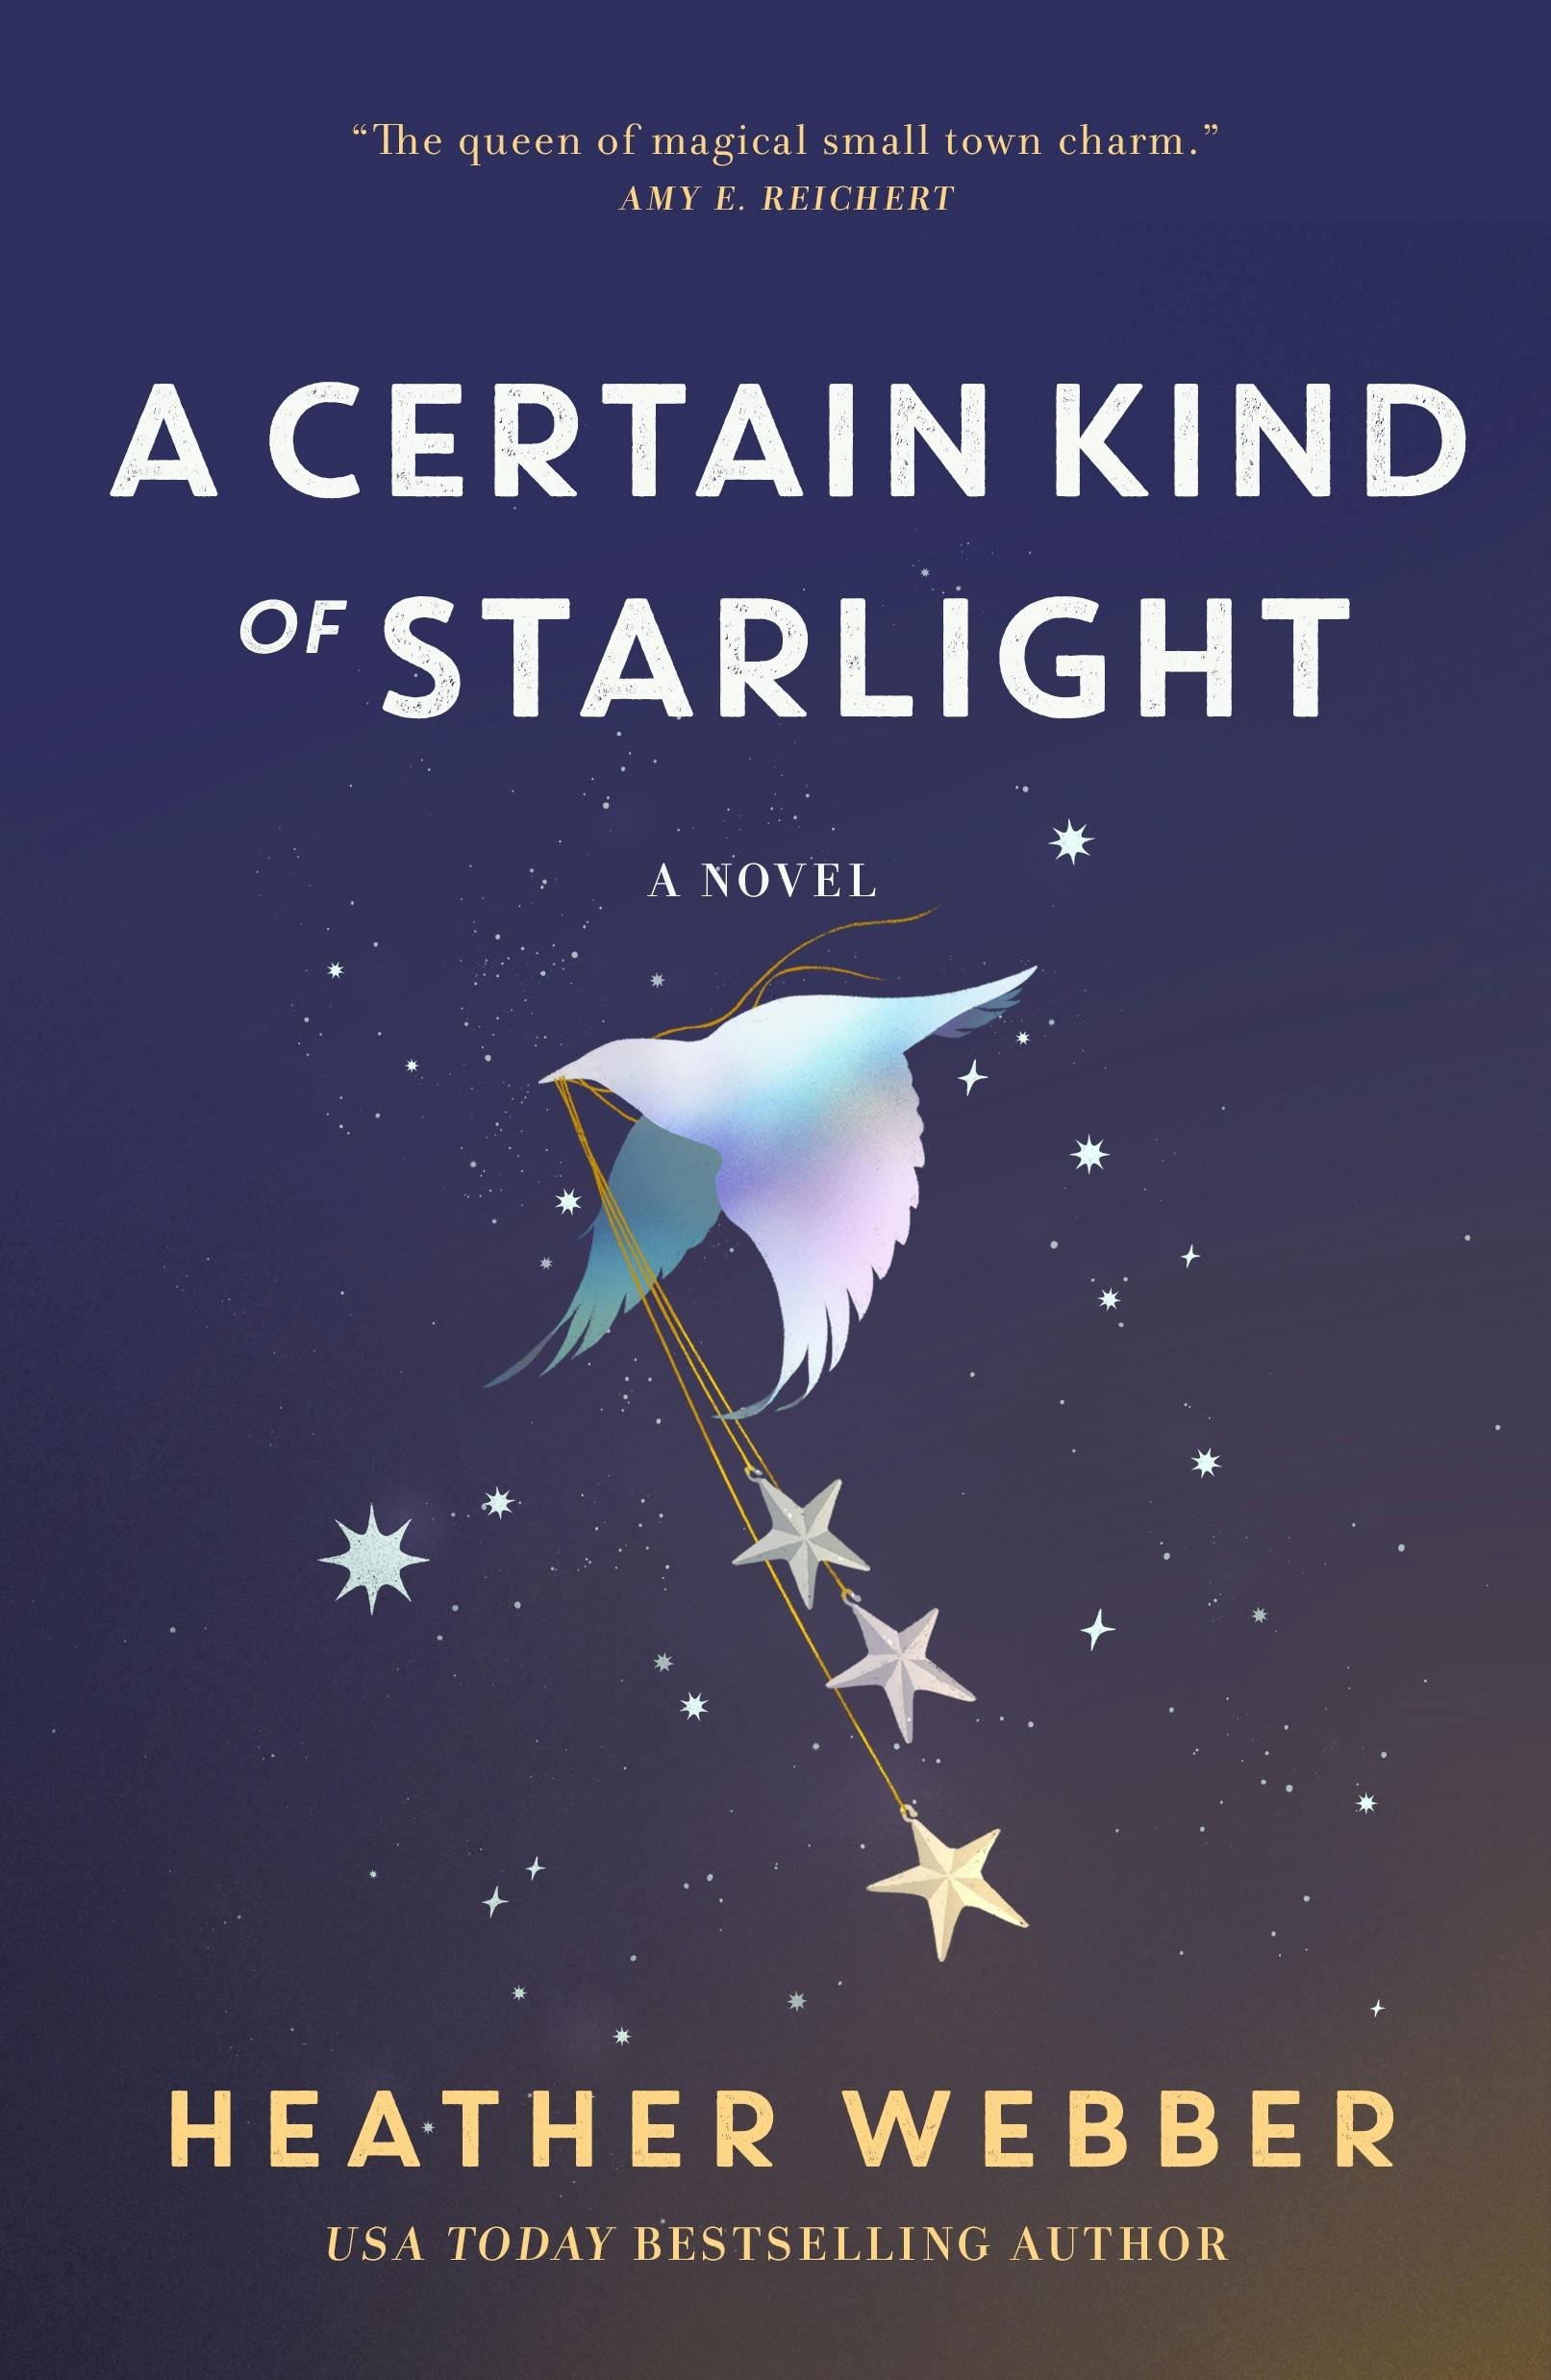 Cover for the book titled as: A Certain Kind of Starlight